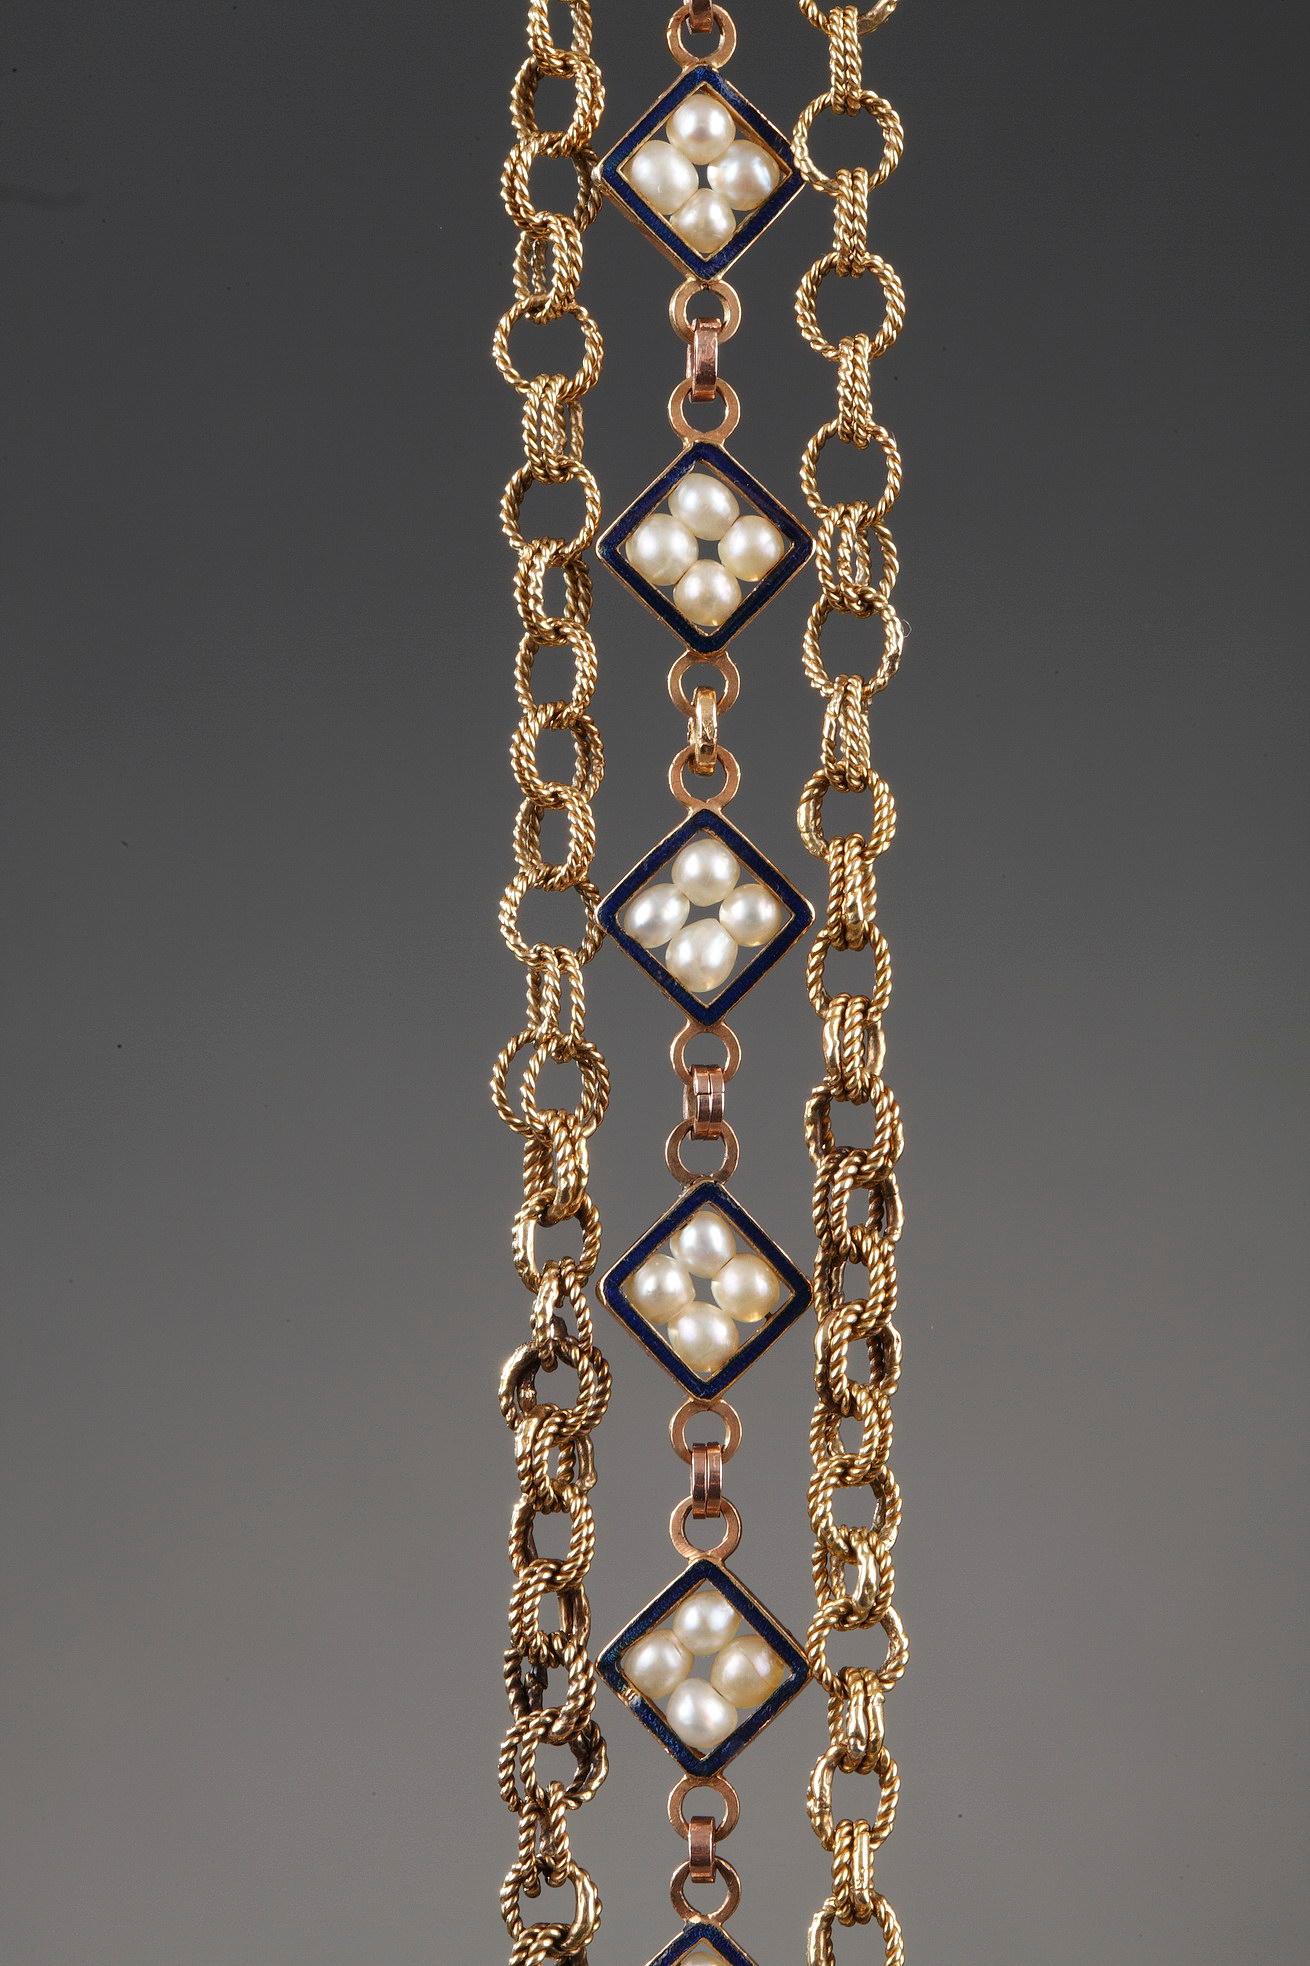 Women's or Men's Chatelaine with Gold, Enamel and Pearls, Late 18th Century Work For Sale